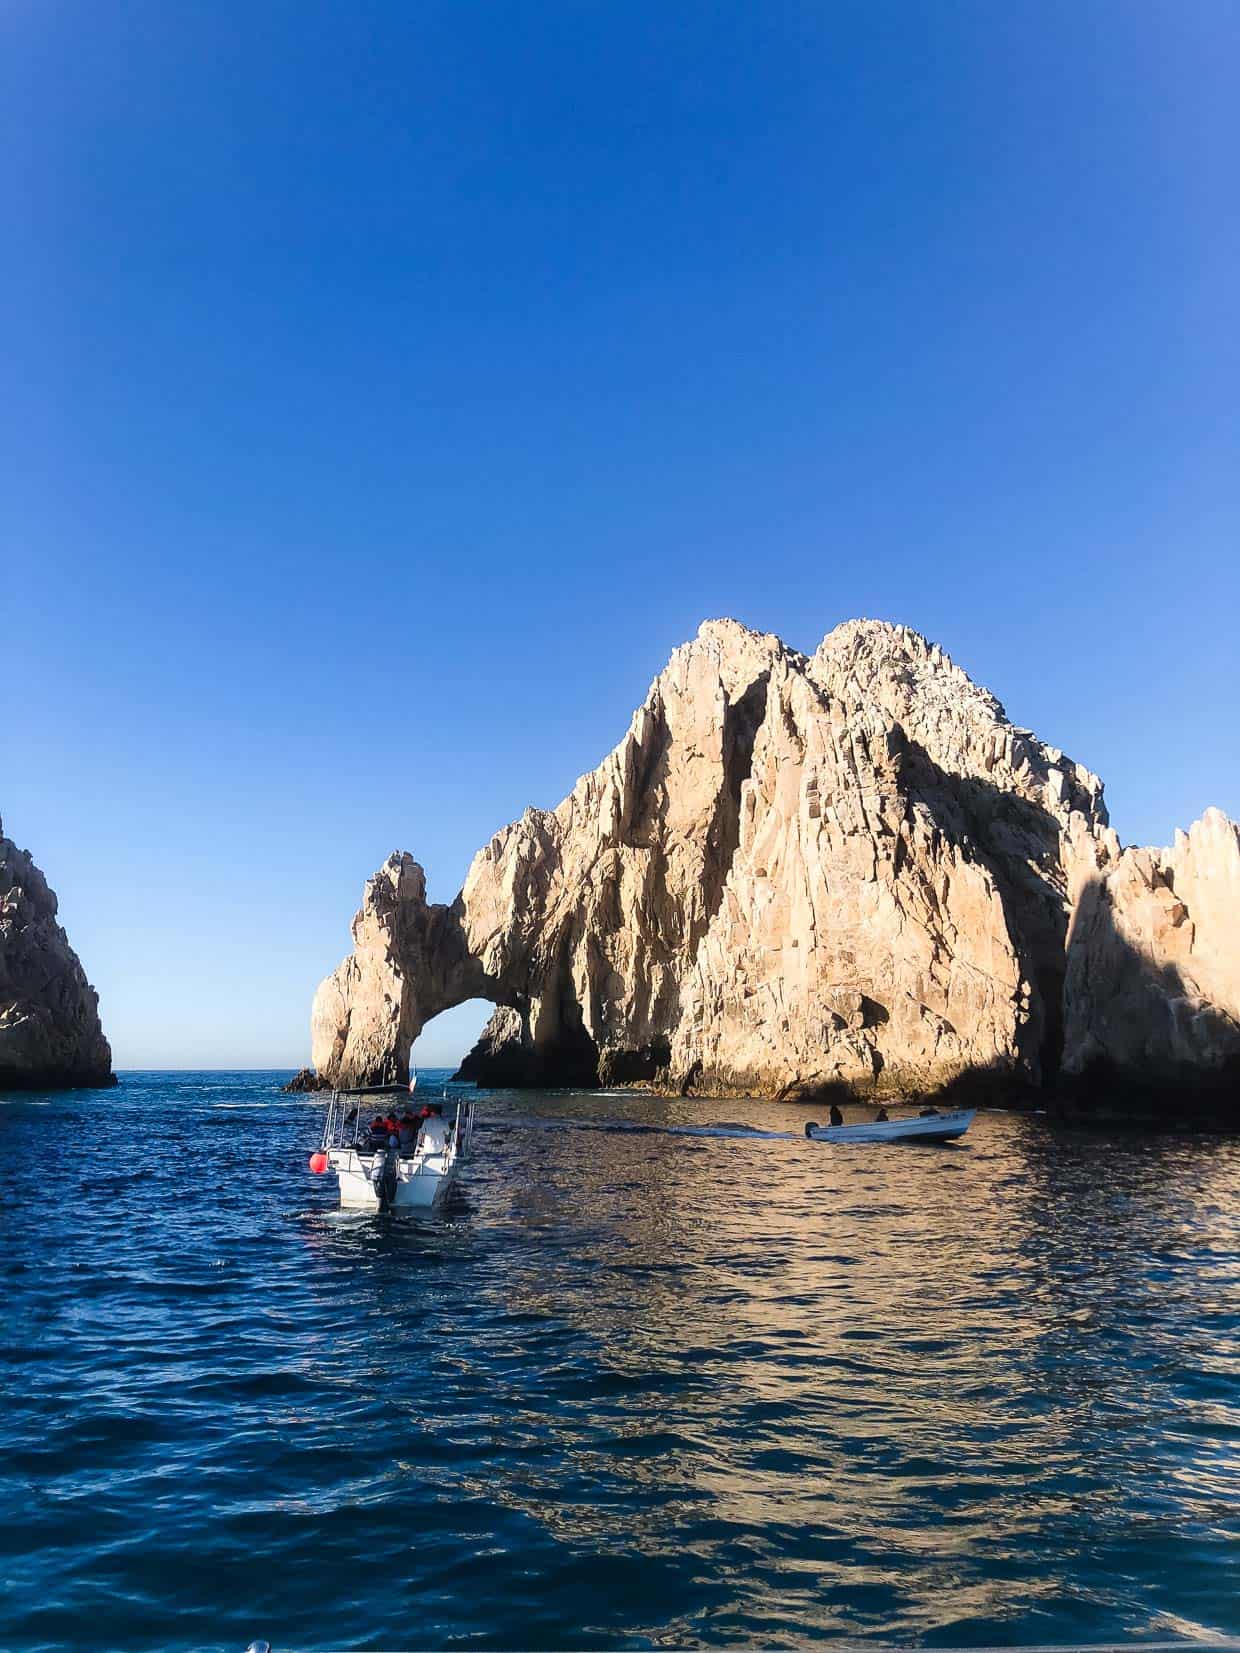 El Archo of Cabo San Lucas is one of many excursions in Mexico with Princess Cruises.